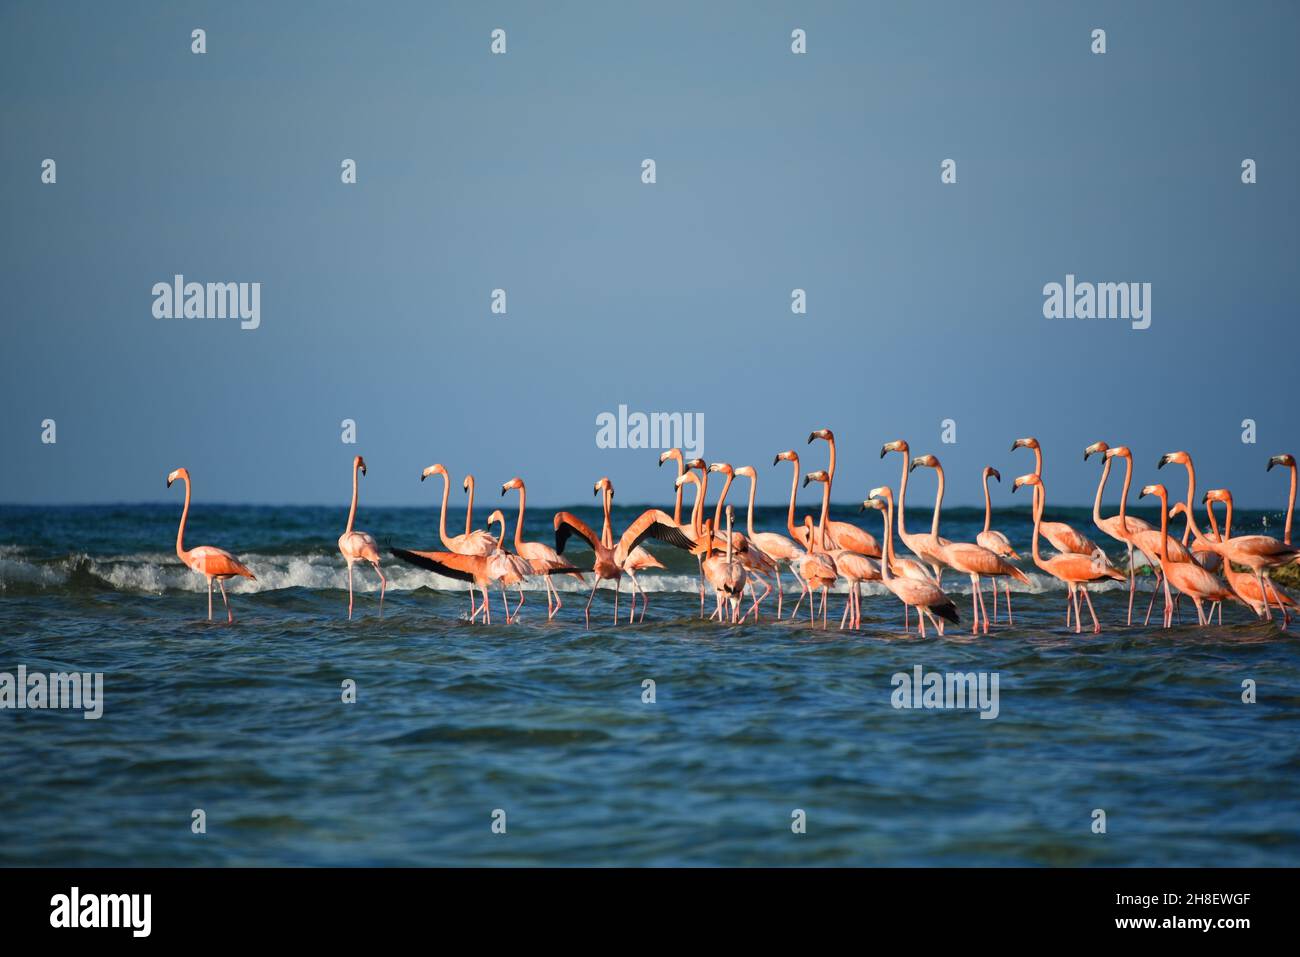 A close up view of a group of wild Flamingos about to take off from a Caribbean Sea sand bar.  Shot from a boat off the remote island of Mayaguana. Stock Photo